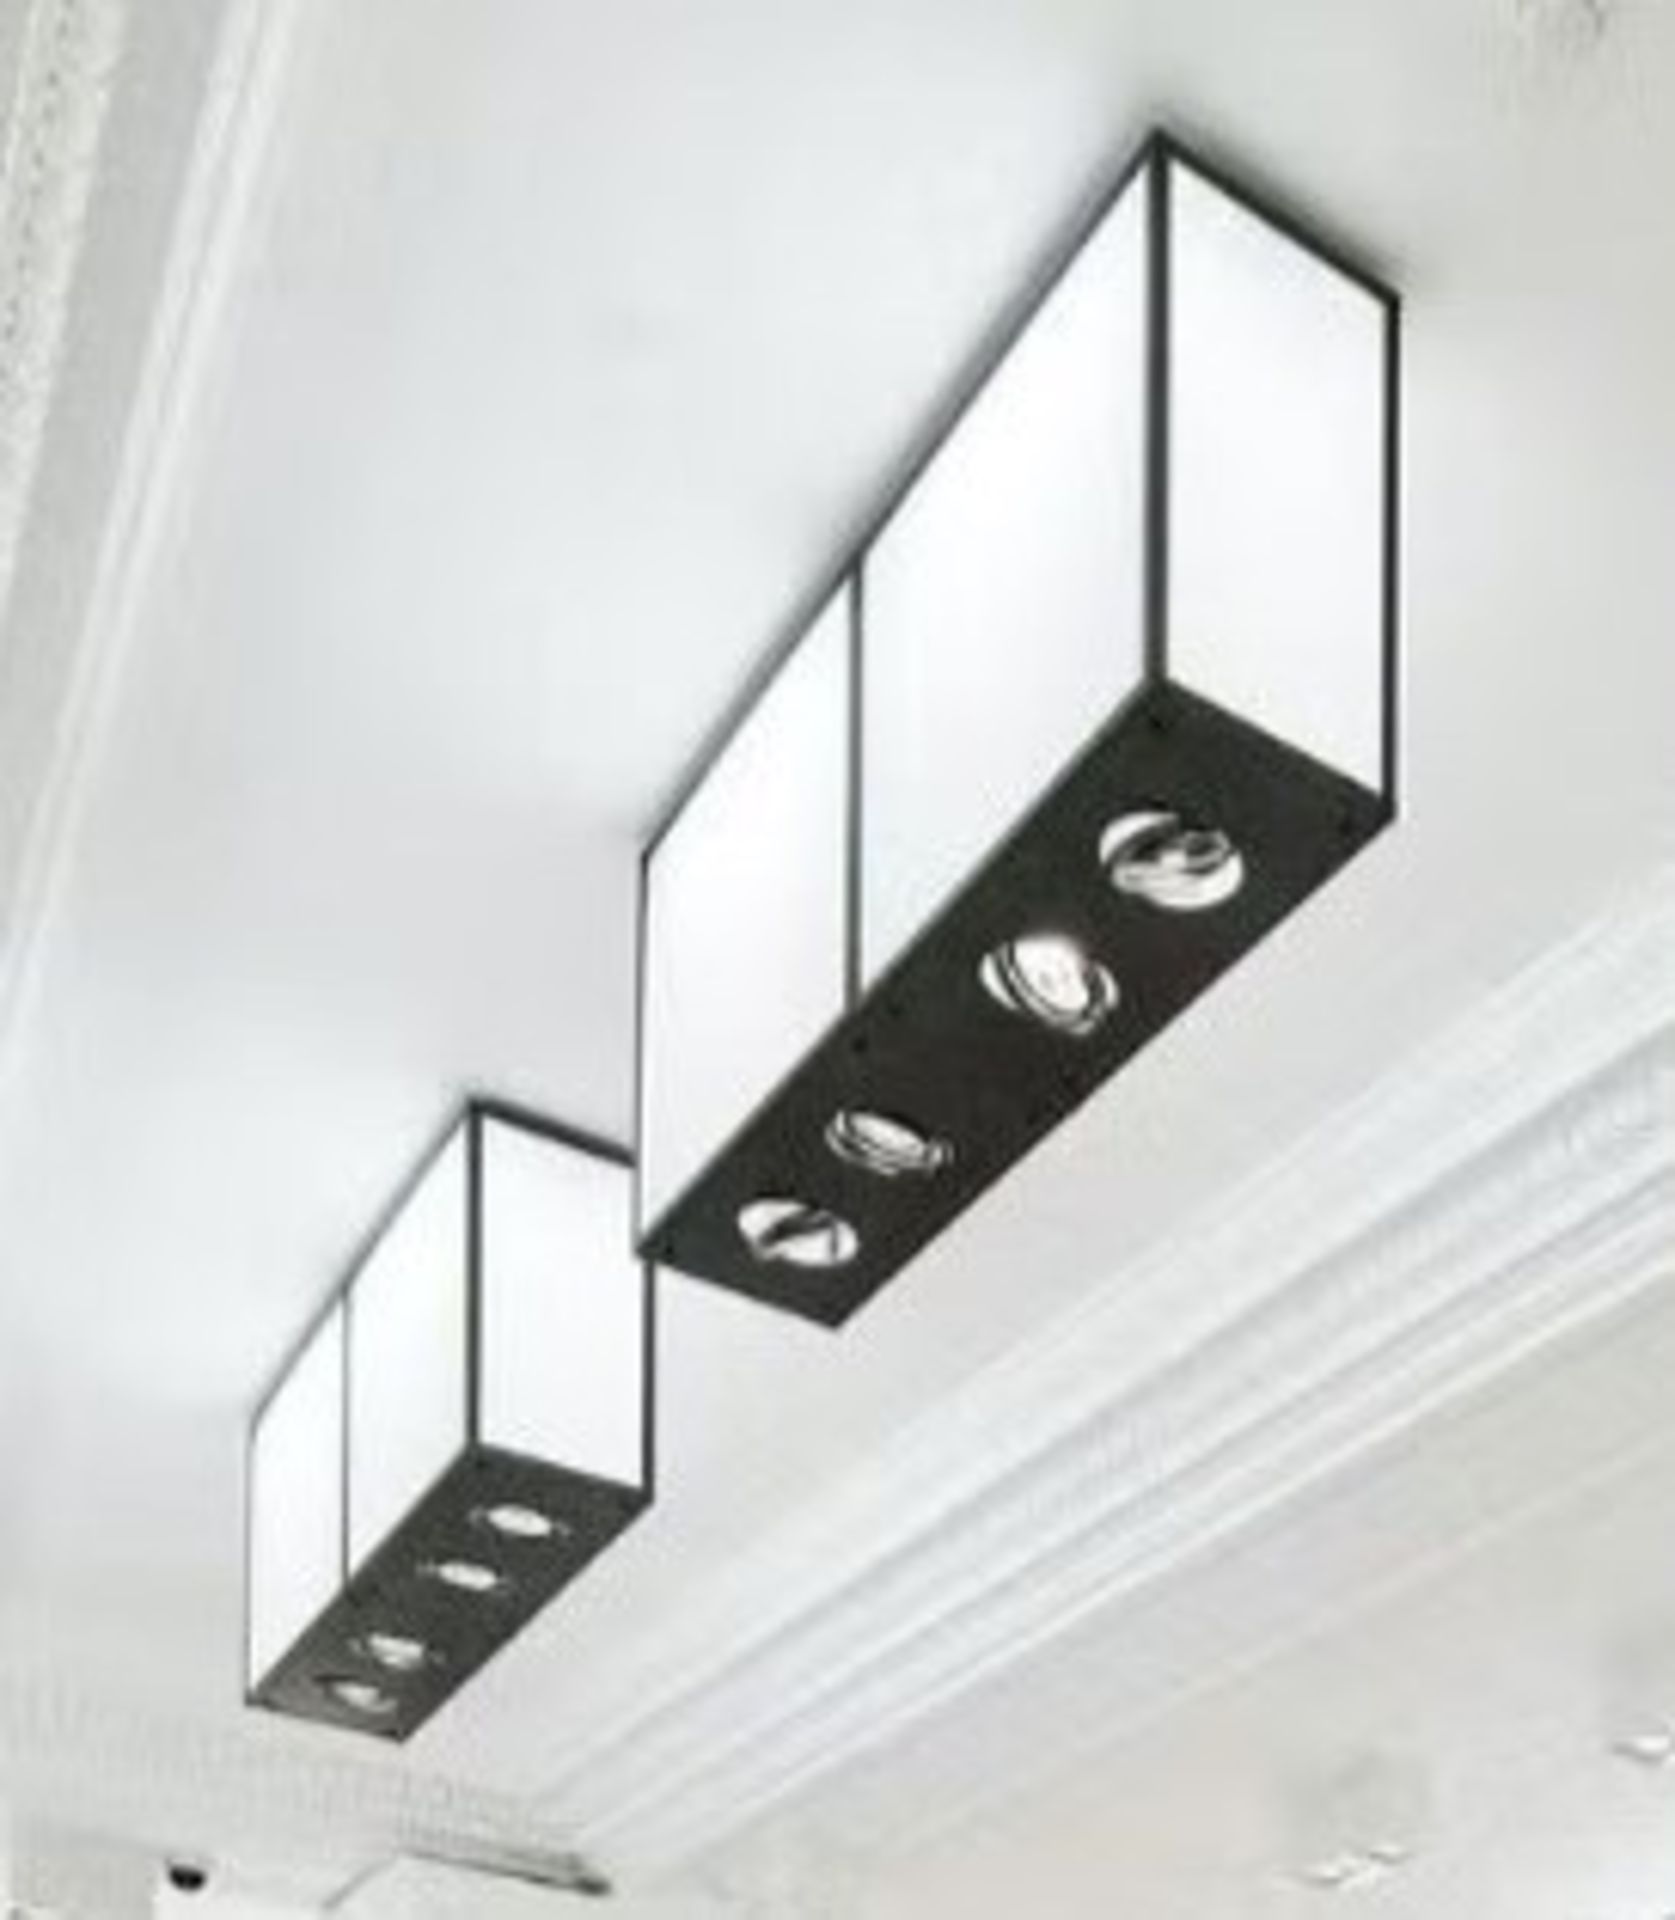 2 x Illuminated Decorative Ceiling Lights From a Famous London Department Store